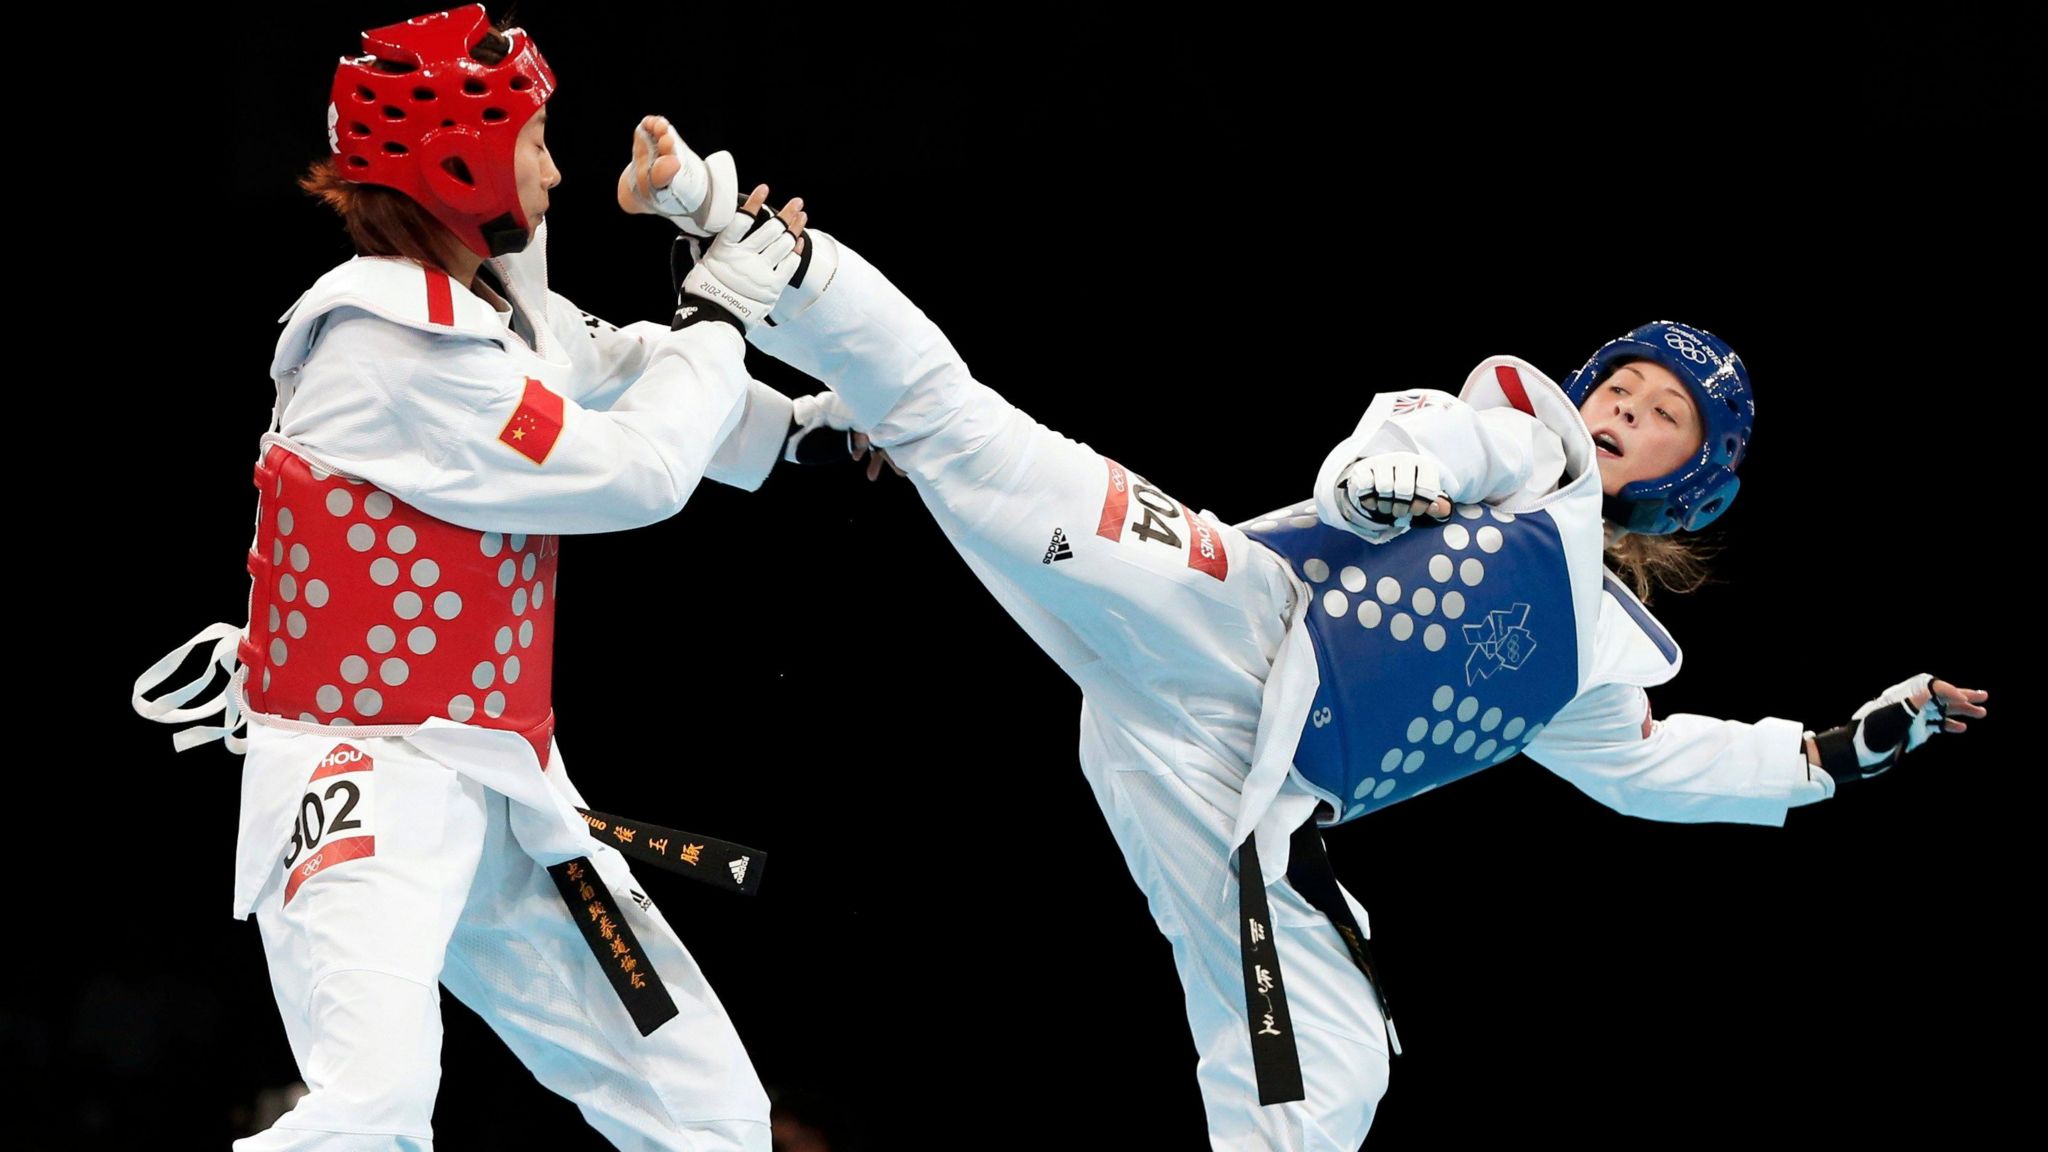 Jade Jones competing against China's Hou Yuzhuo during their -57kg gold medal taekwondo match at the London 2012 Olympics